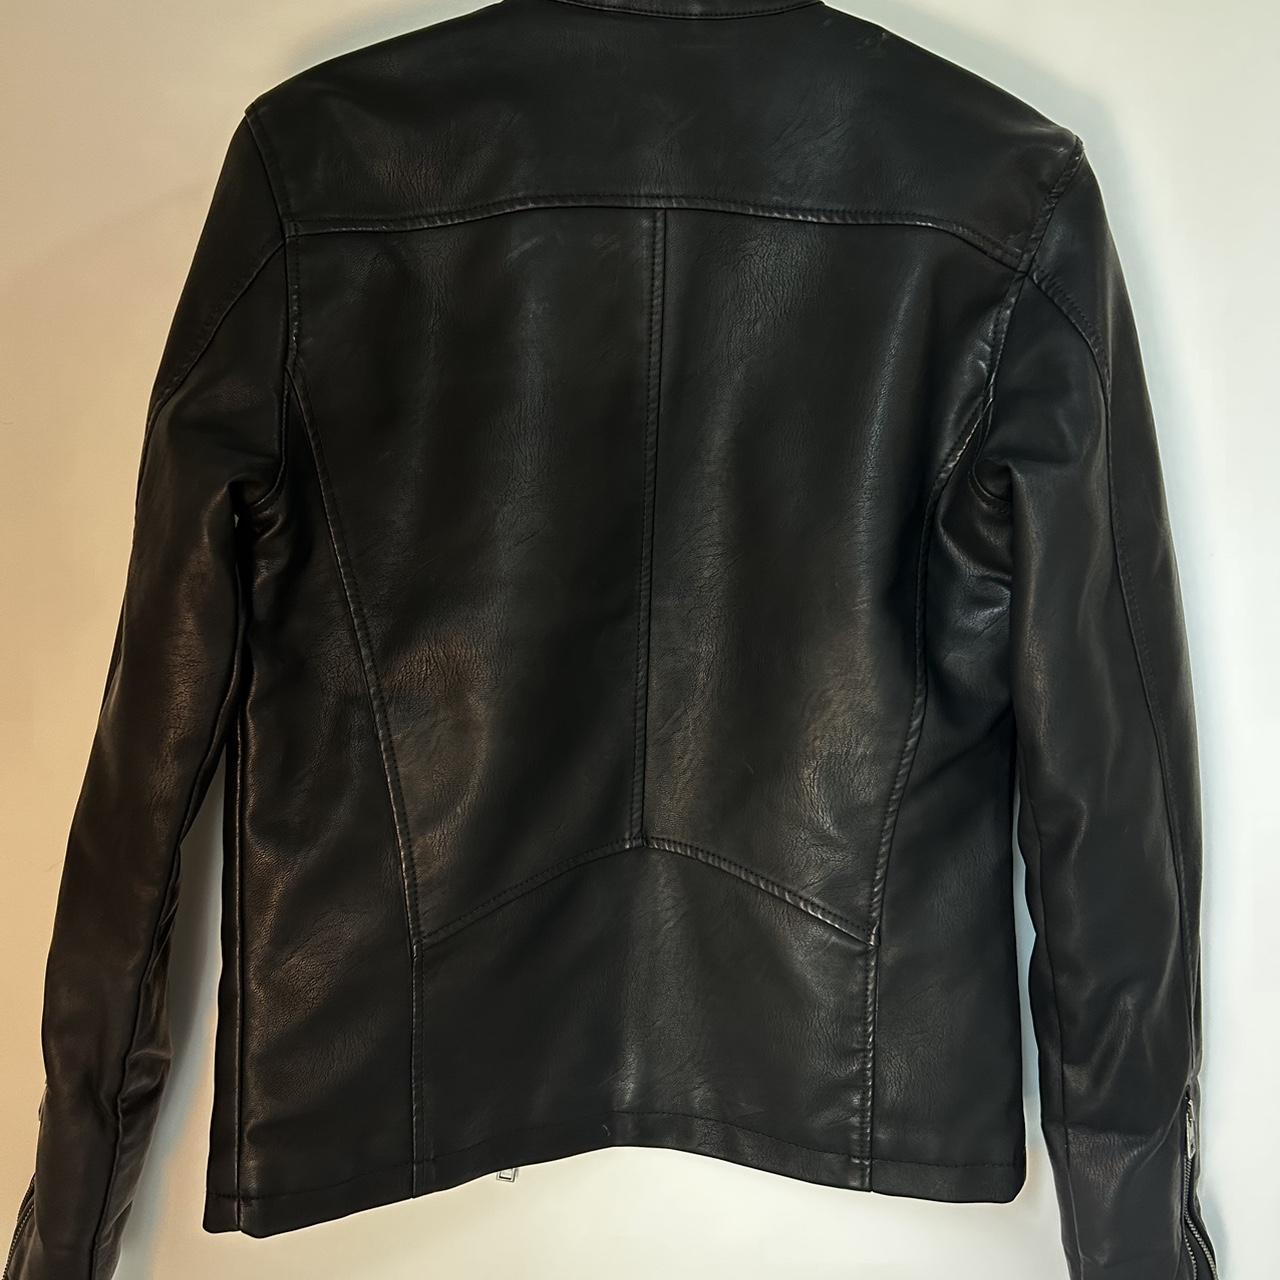 XS !Solid Denmark leather jacket with zipper and snaps - Depop